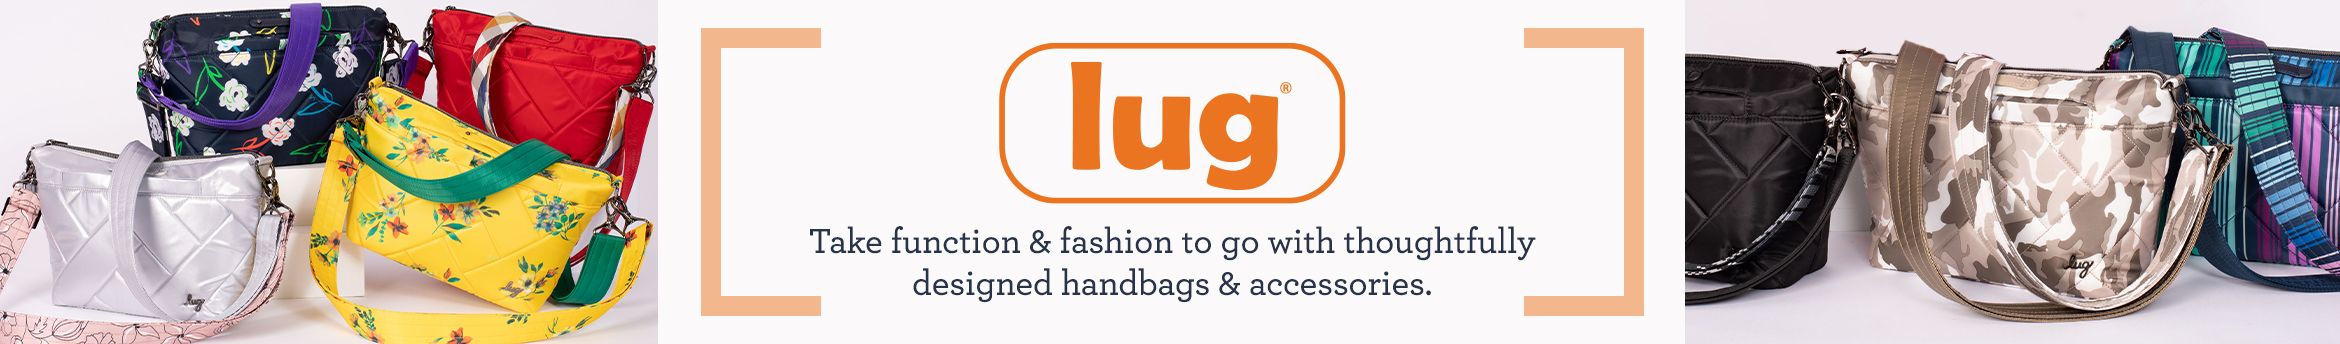 Lug. Take function & fashion to go with thoughtfully designed handbags & accessories.